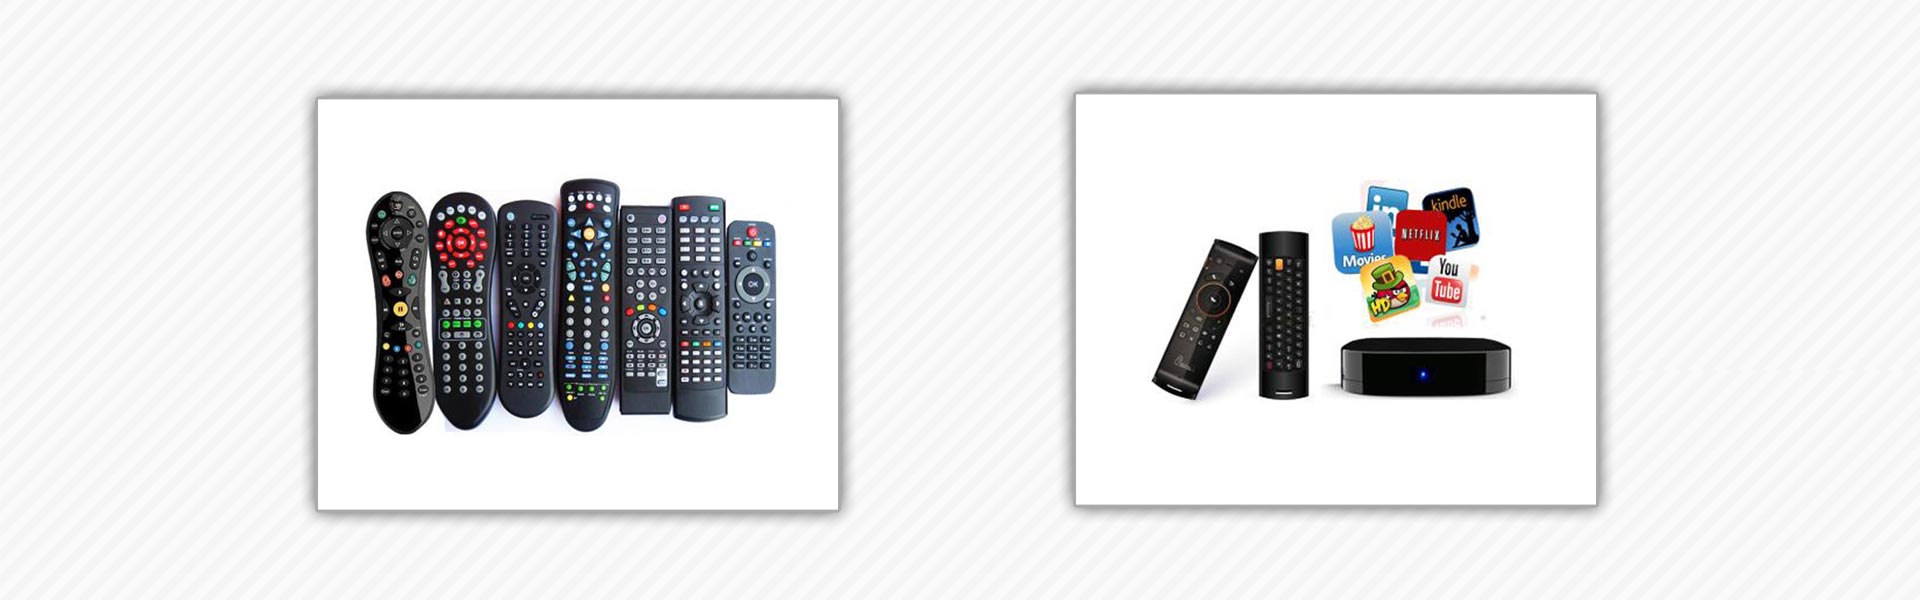 Collage of TV Remotes and a Internet Entertainment Box